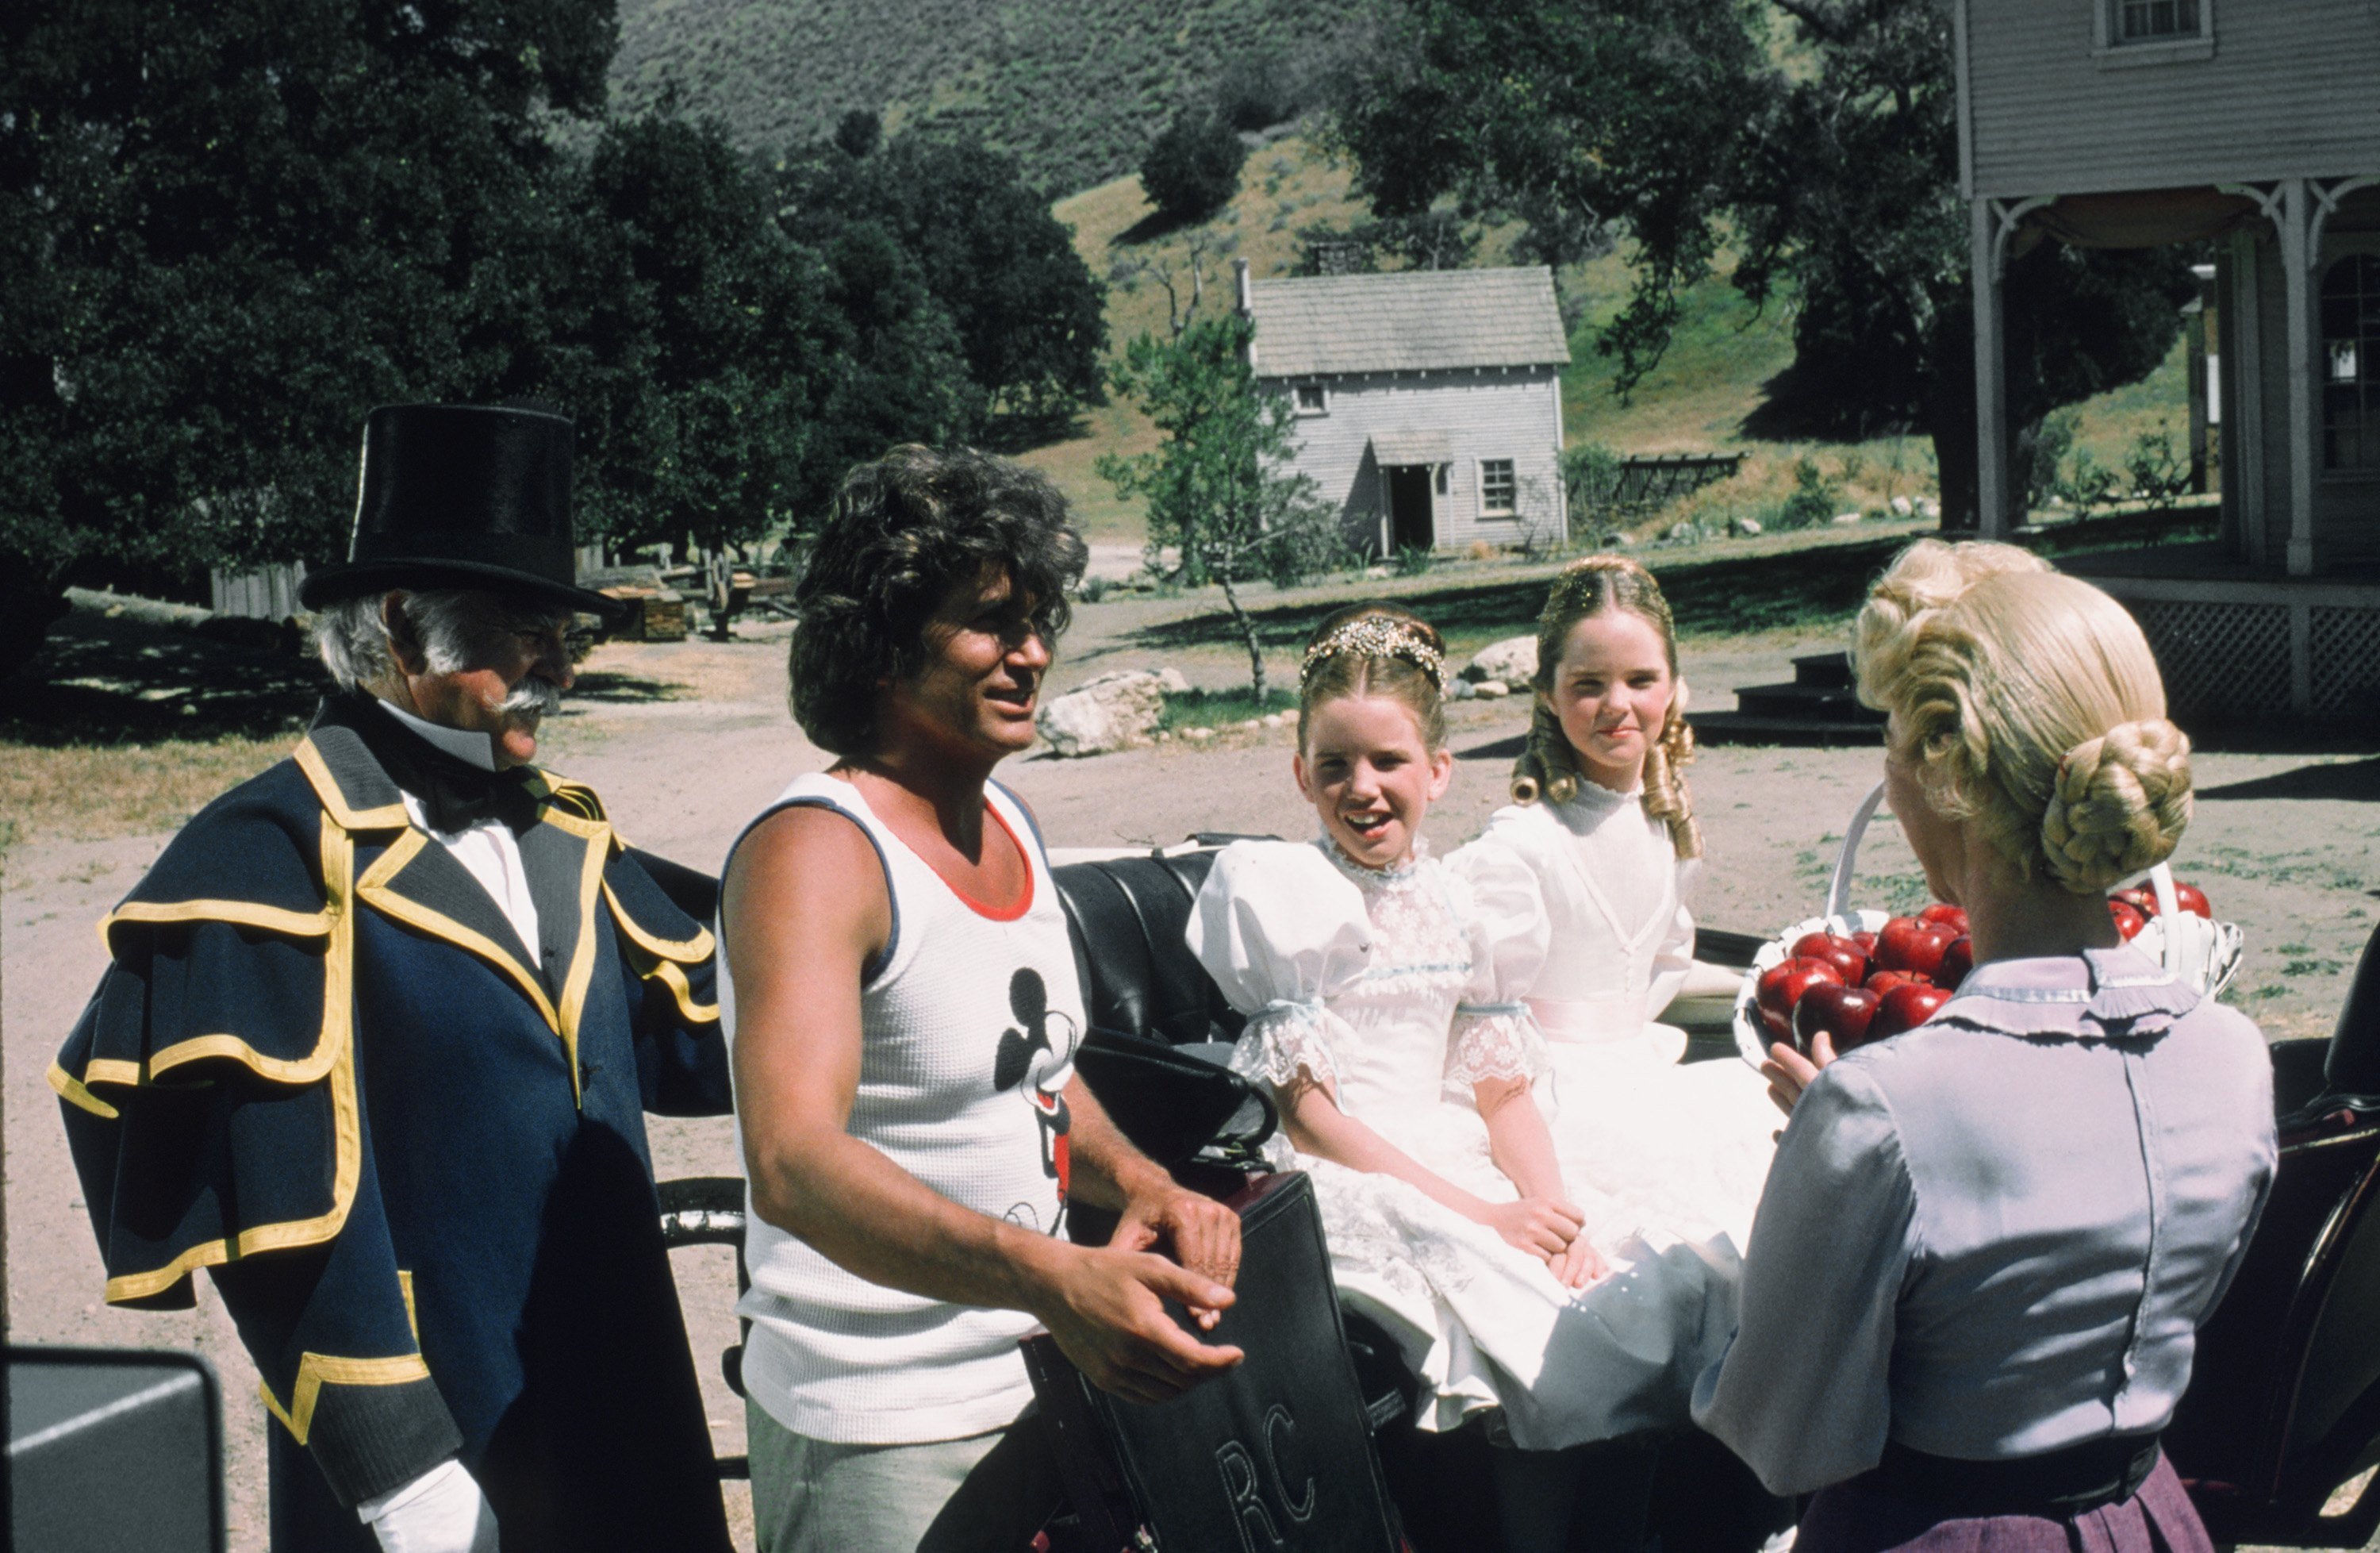 Michael Landon directs a scene on the set of Little House on the Prairie.